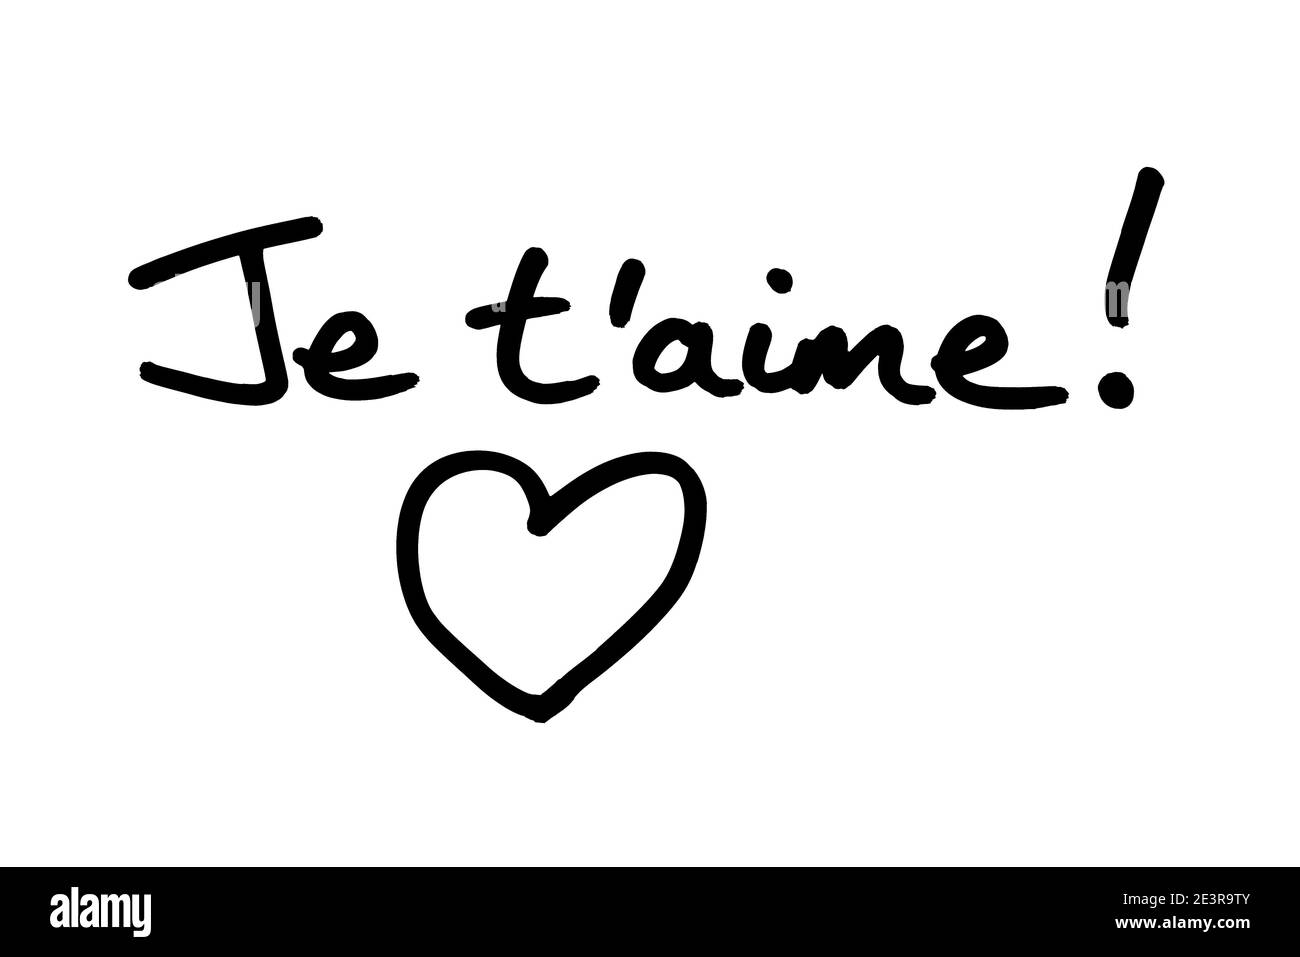 Je taime! - meaning I Love You in the French language, and a heart illustration, handwritten on a white background. Stock Photo